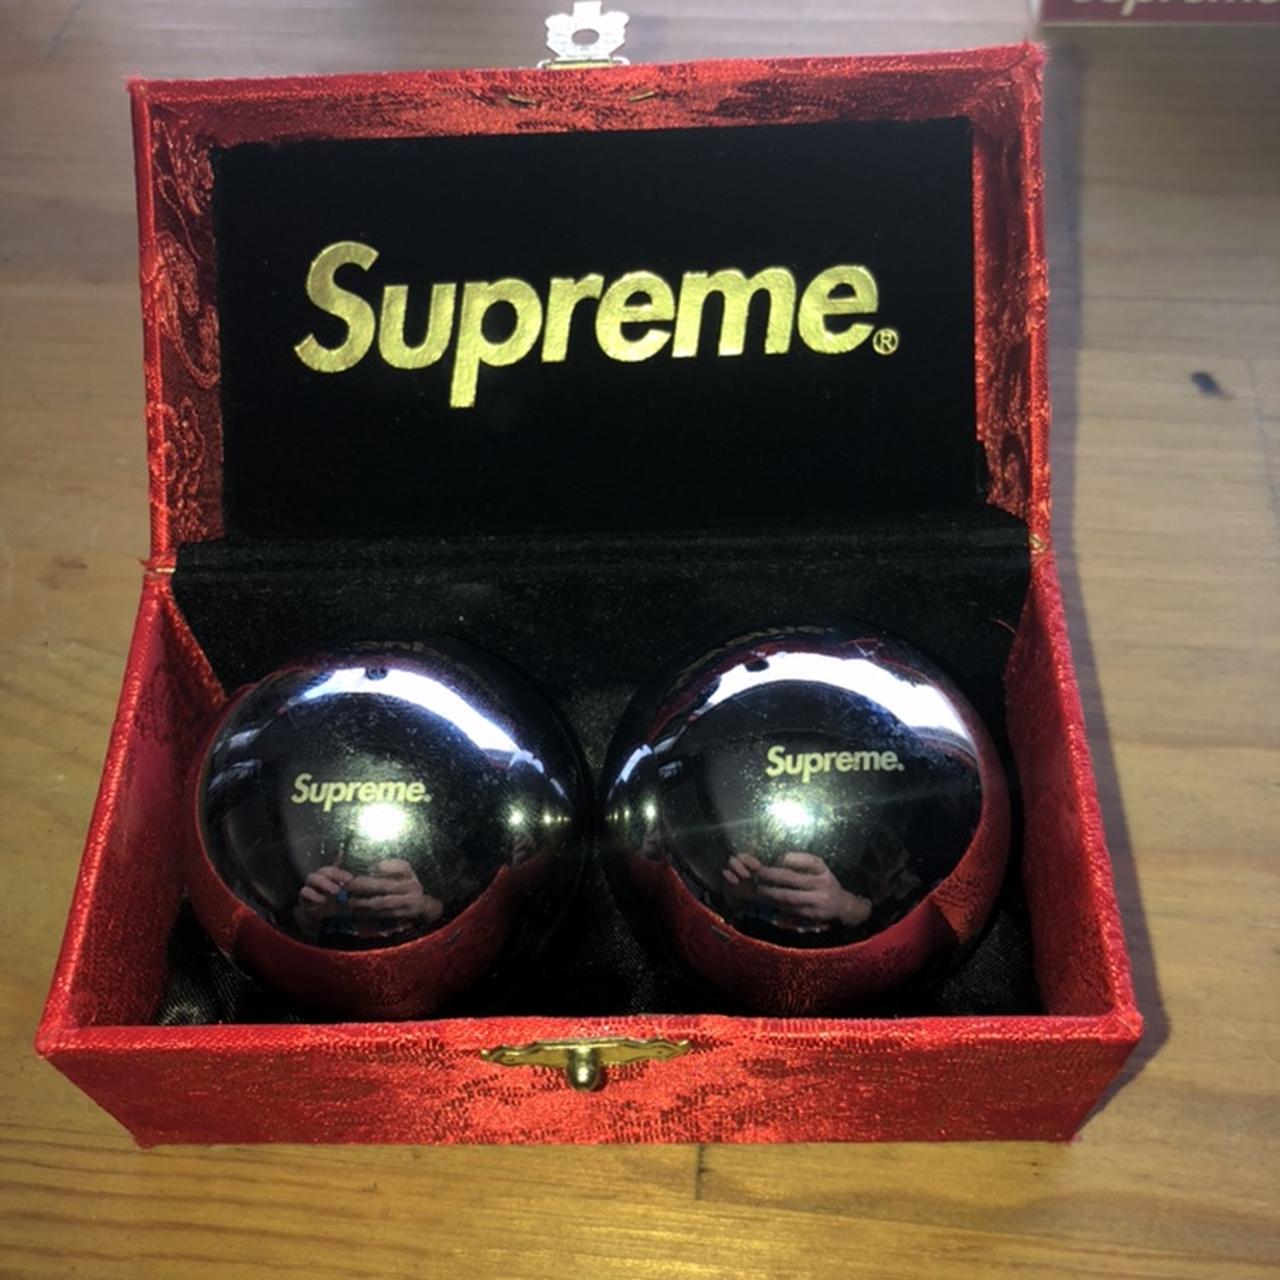 Supreme baoding balls. Very rare and obscure - Depop